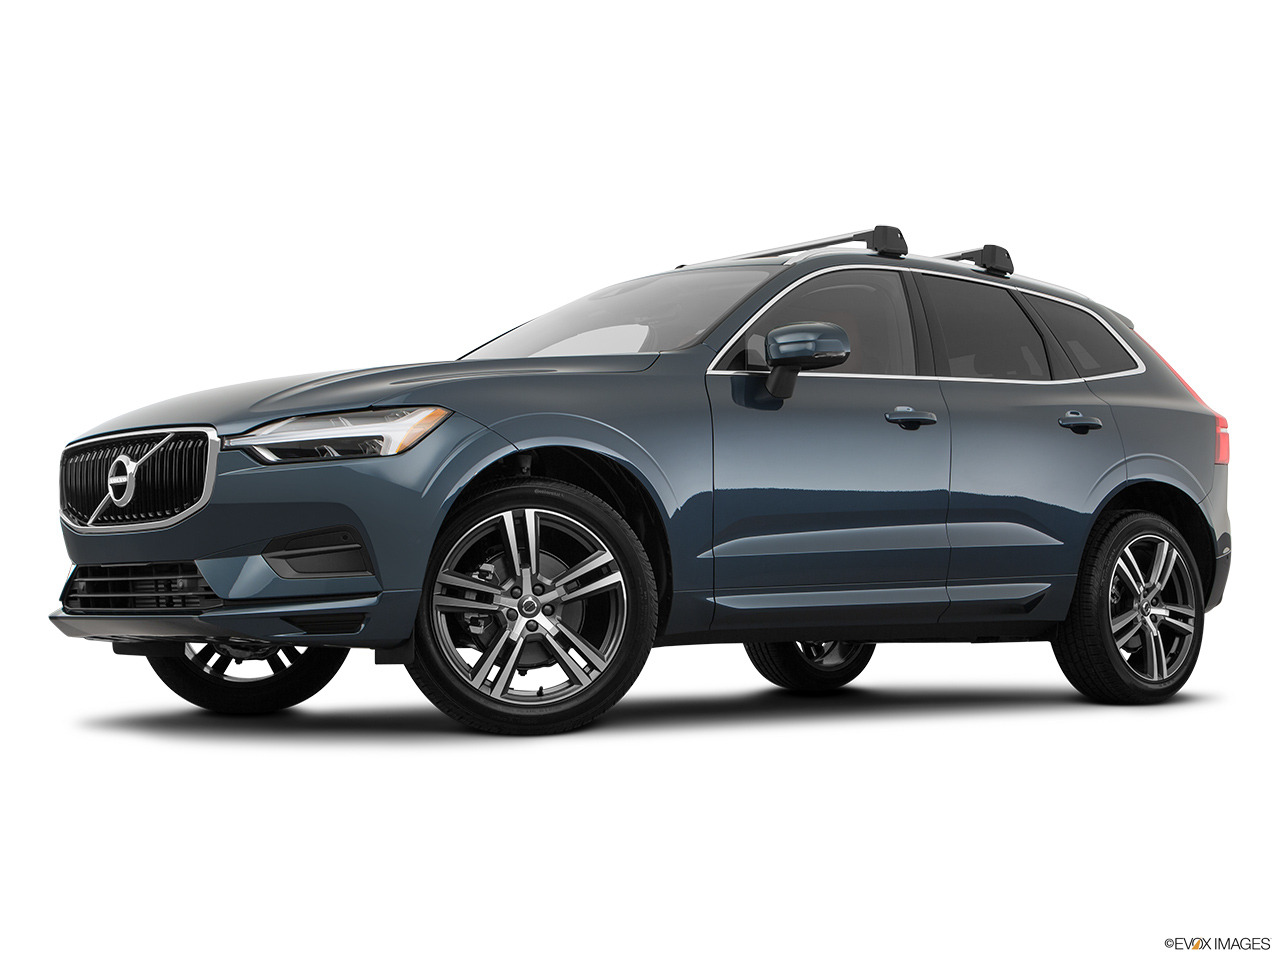 2018 Volvo XC60 T5 Momentum Low/wide front 5/8. 